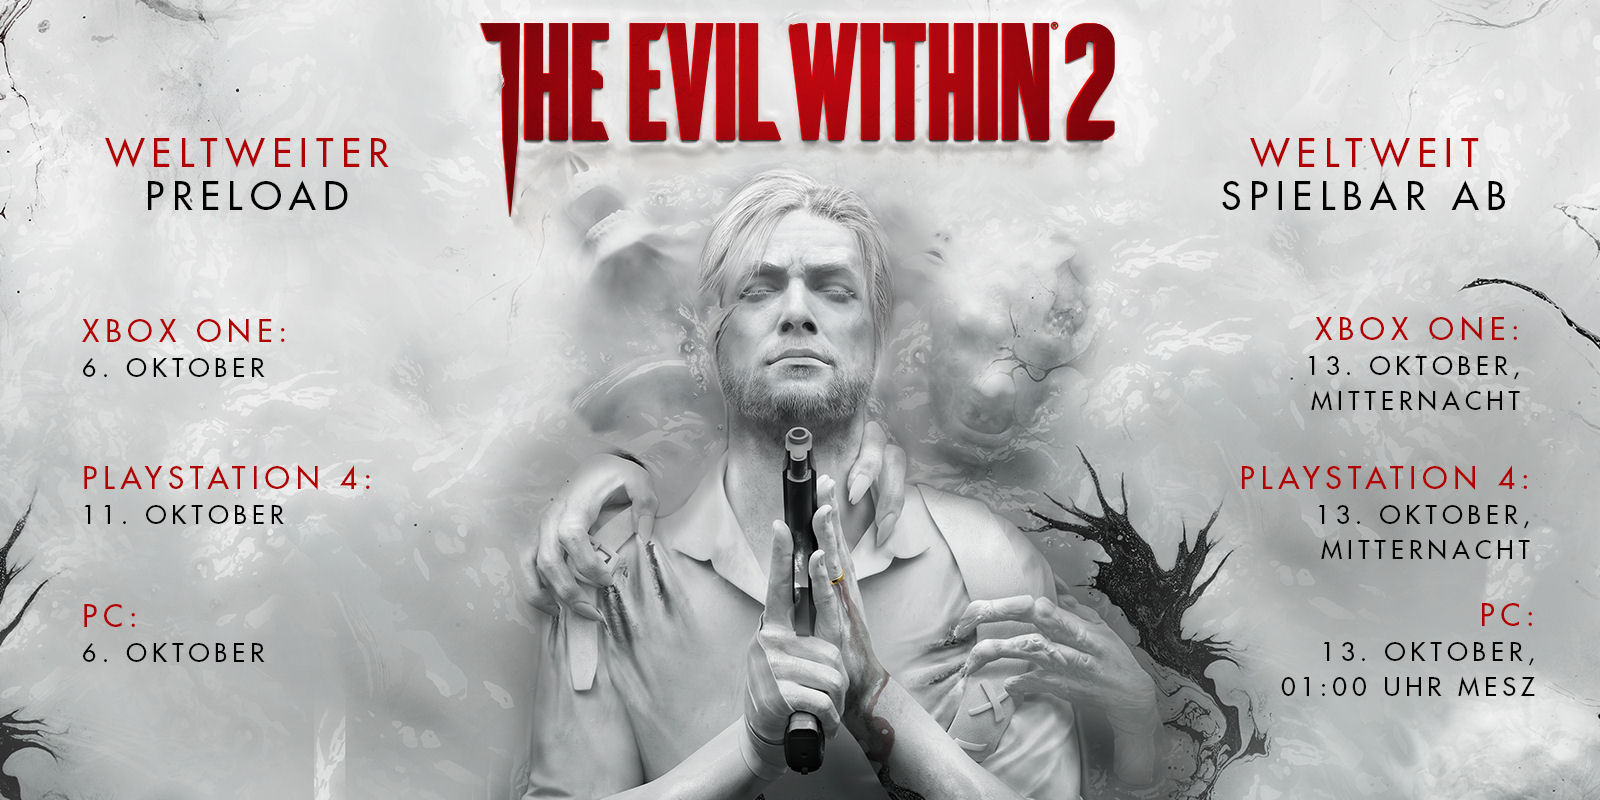 The Evil Within 2 Preload